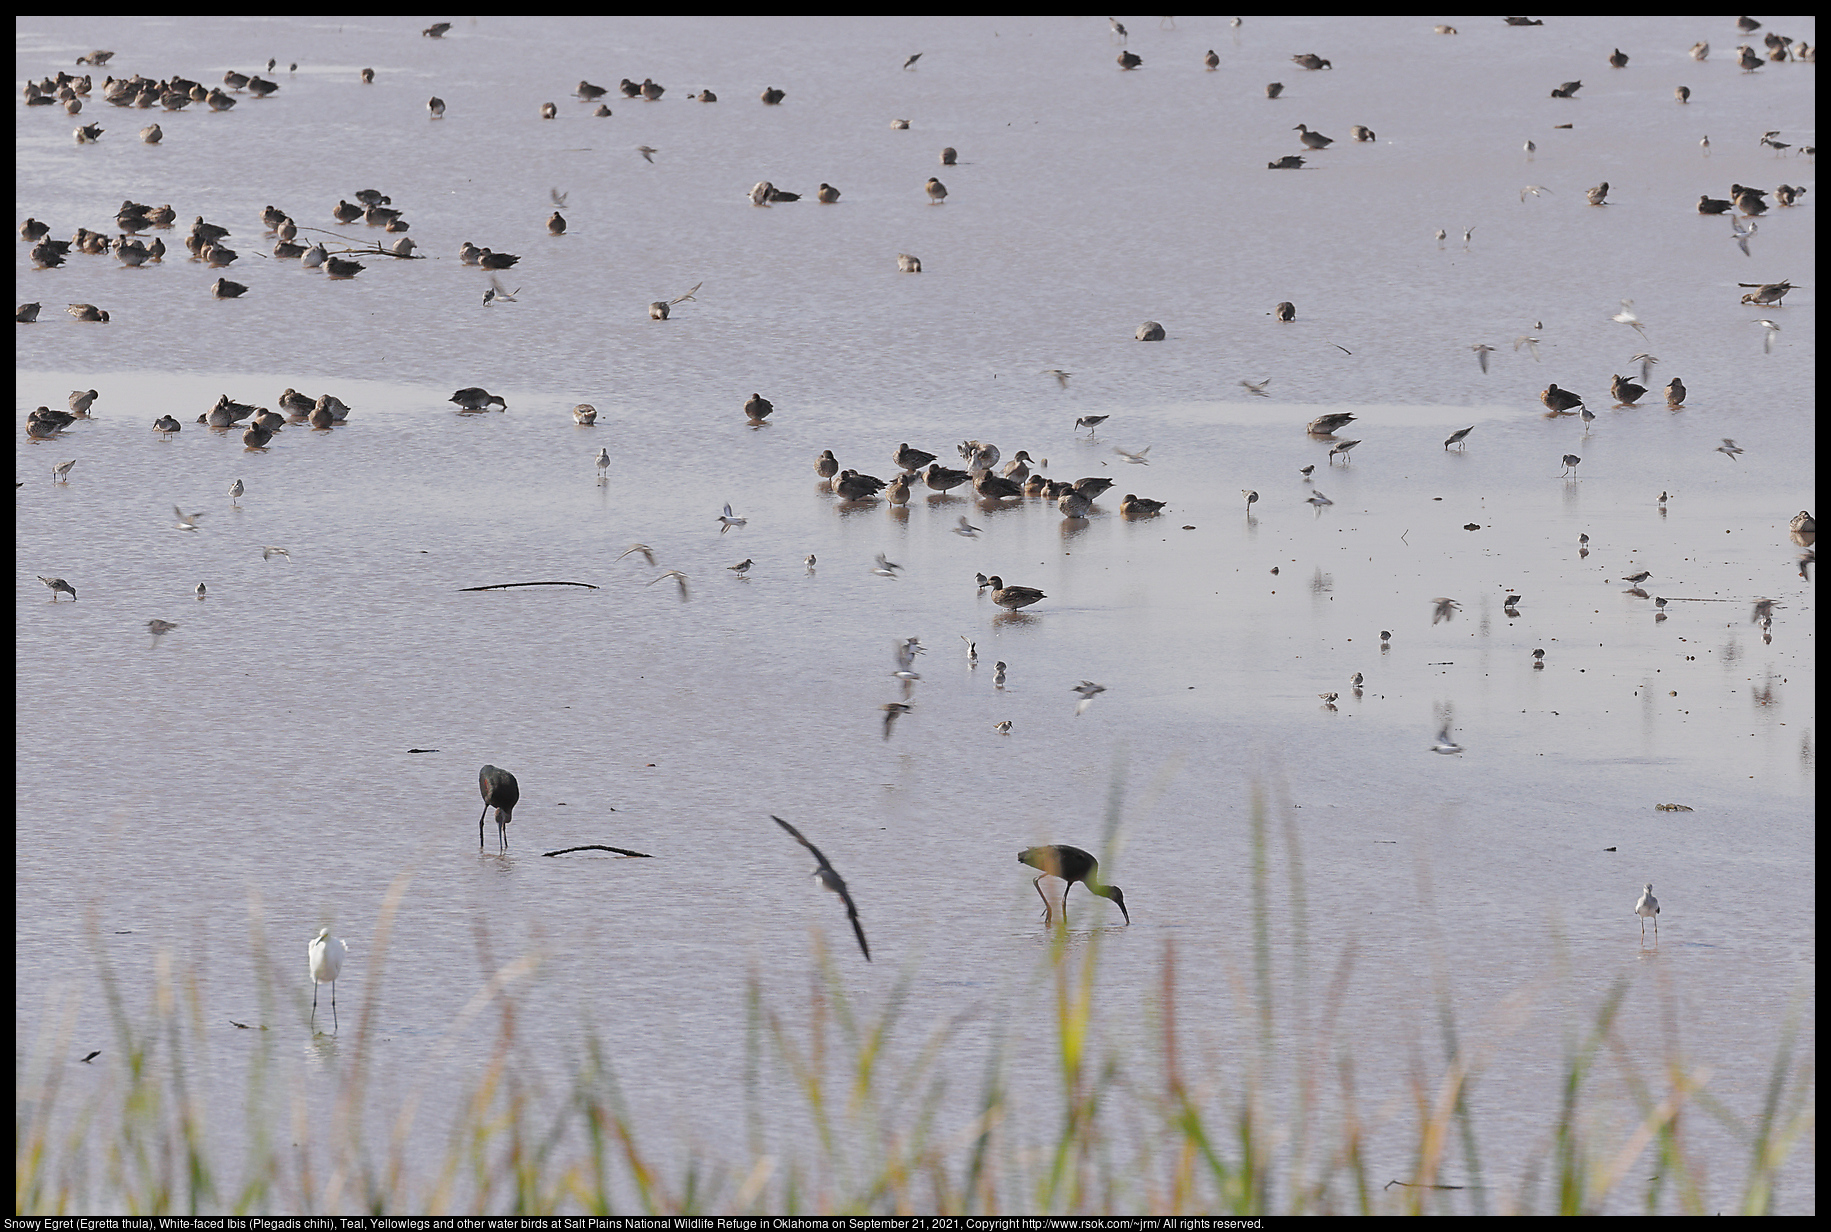 Snowy Egret (Egretta thula), White-faced Ibis (Plegadis chihi), Teal, Yellowlegs and other water birds at Salt Plains National Wildlife Refuge in Oklahoma on September 21, 2021